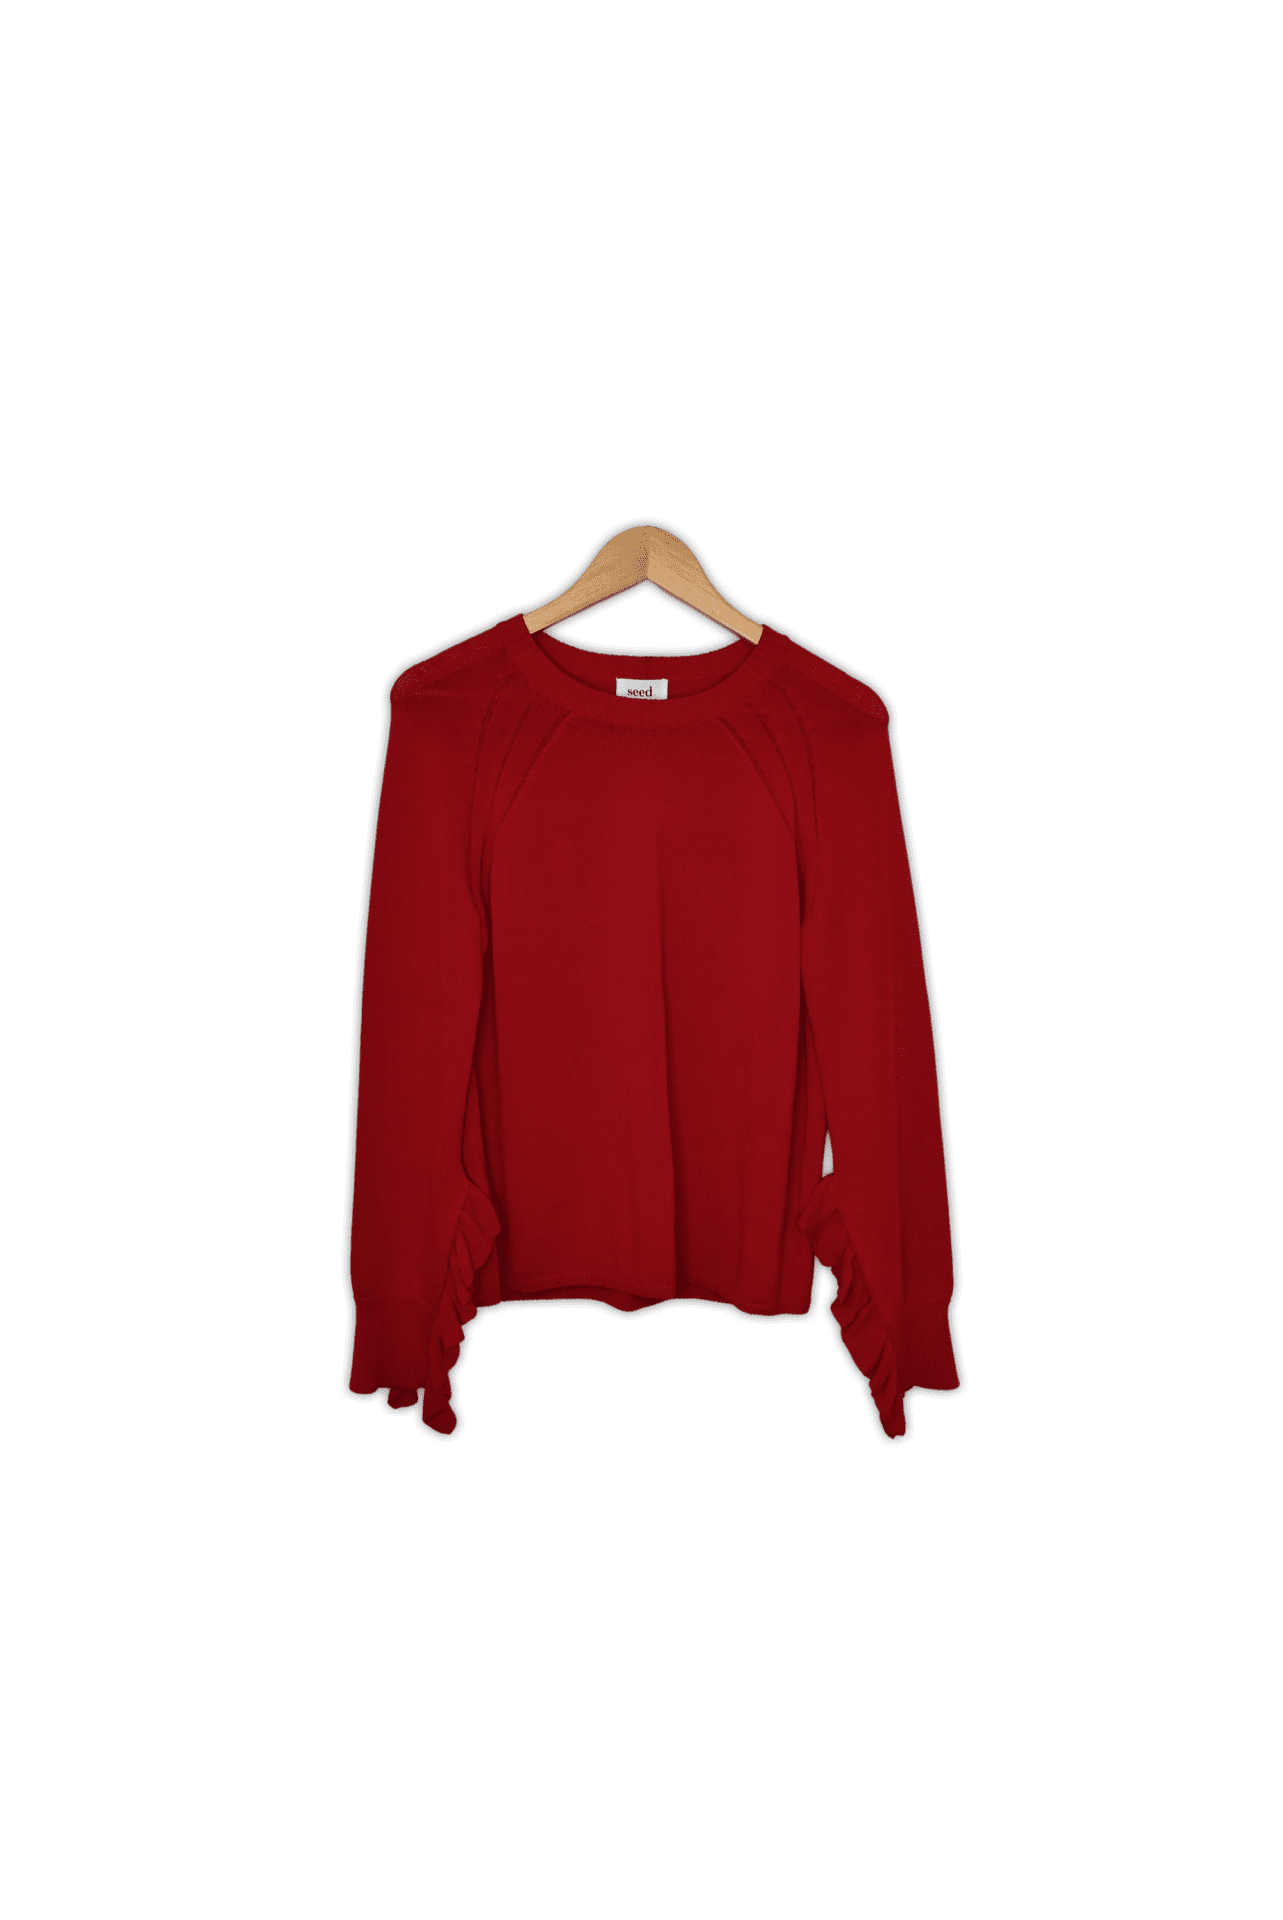 Small, red knit sweater with frill detailing on sleeve